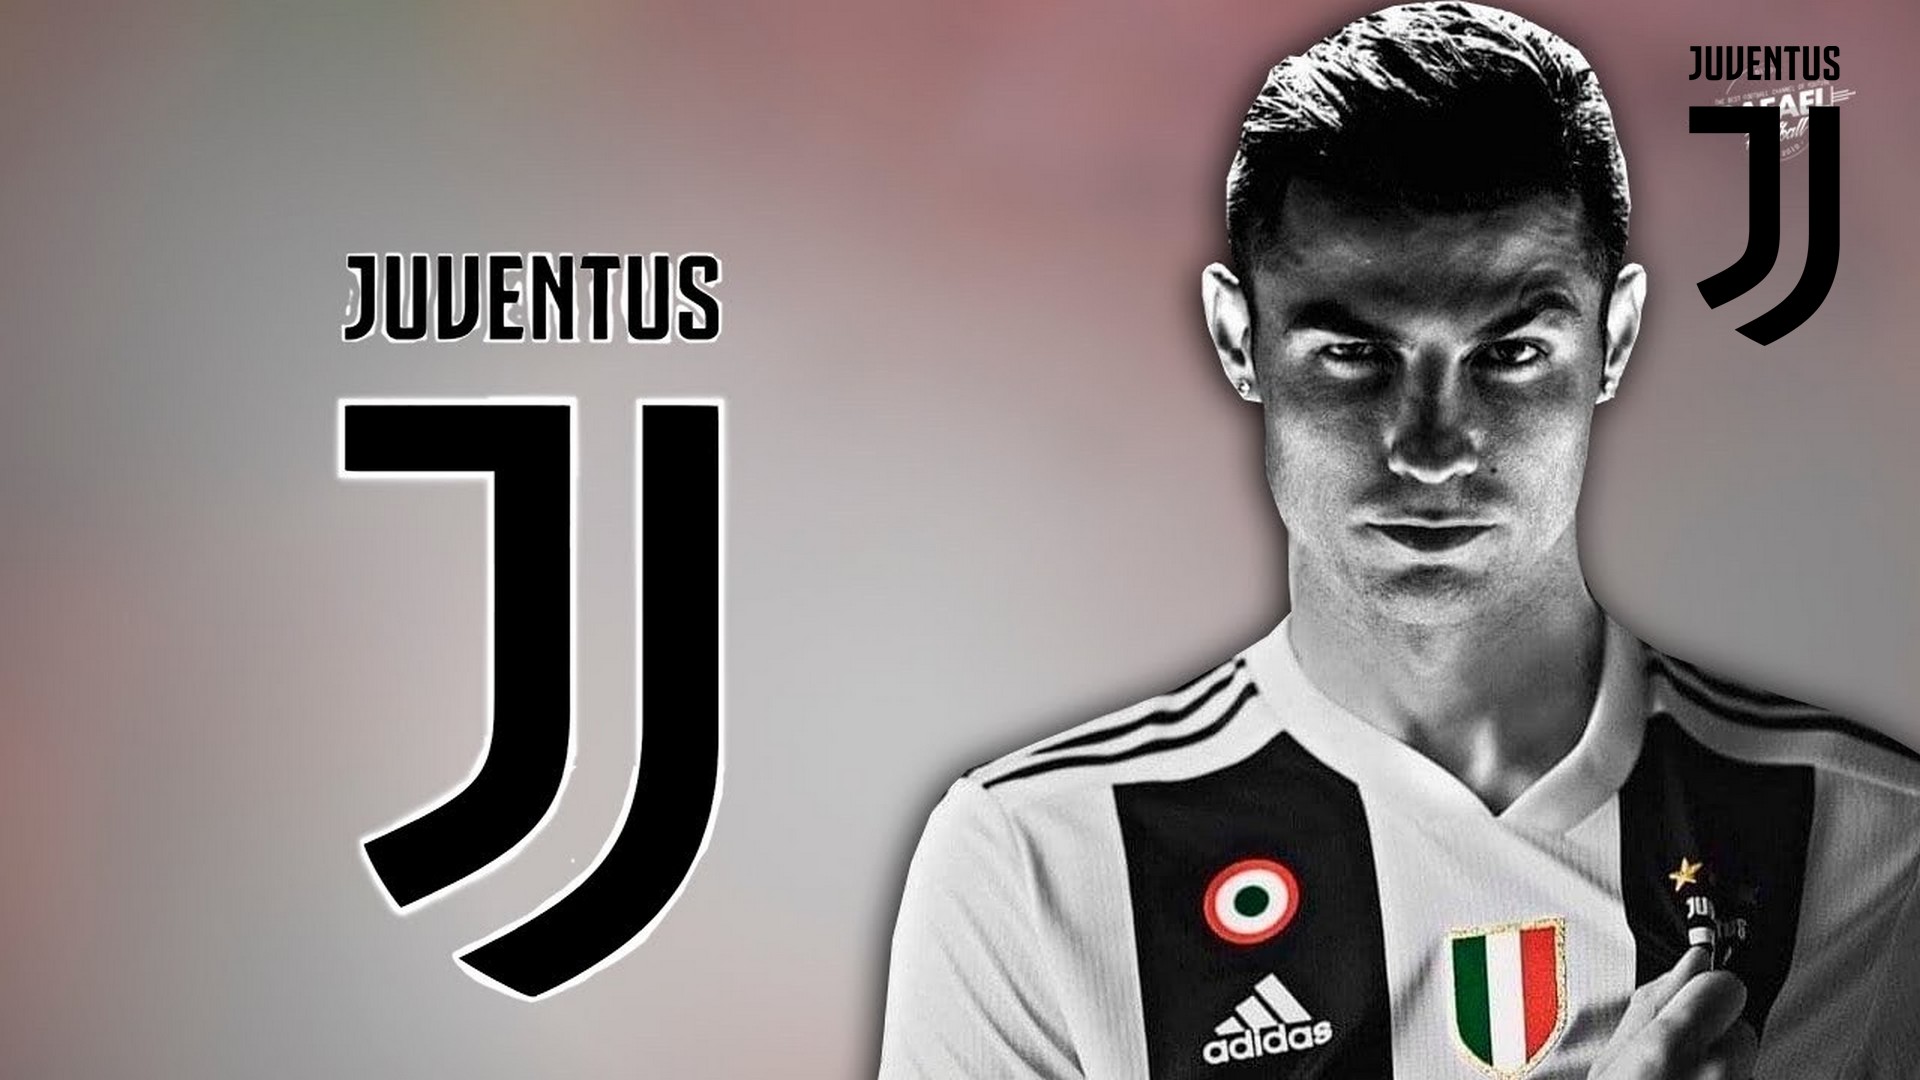 CR7 Juventus Wallpaper with resolution 1920x1080 pixel. You can make this wallpaper for your Mac or Windows Desktop Background, iPhone, Android or Tablet and another Smartphone device